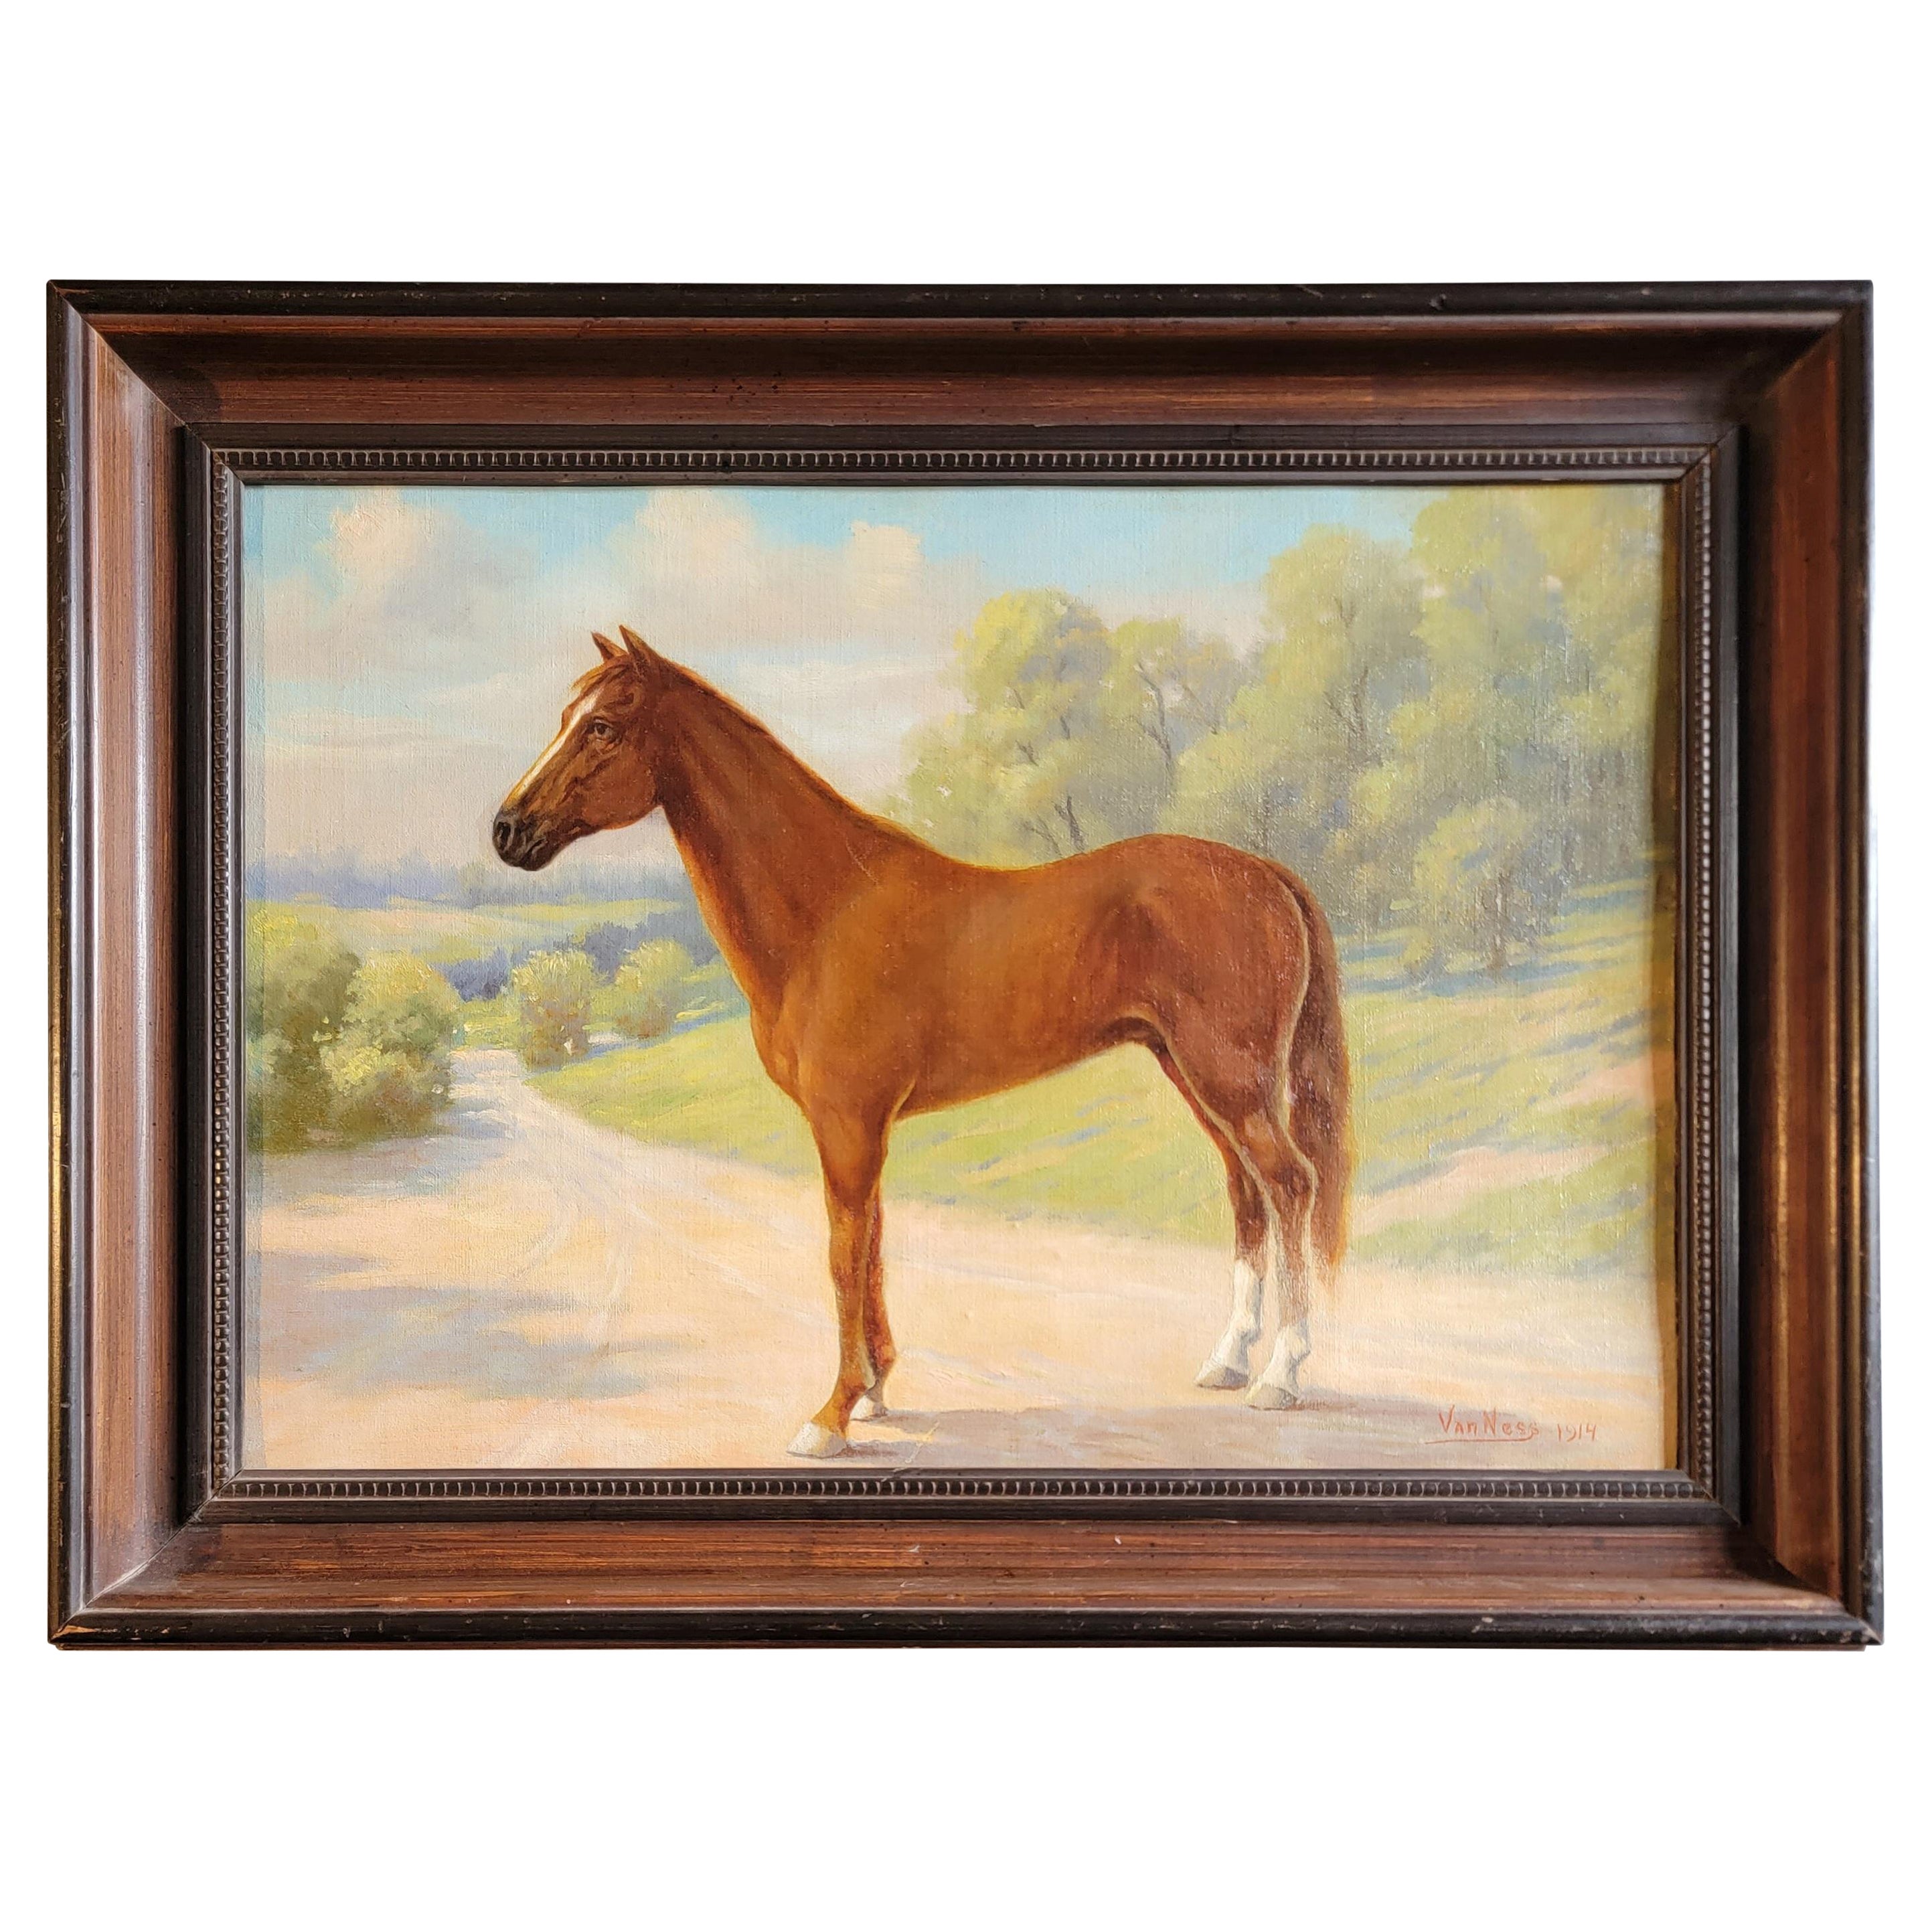 Signed & Dated 1914 Oil Painting in Frame